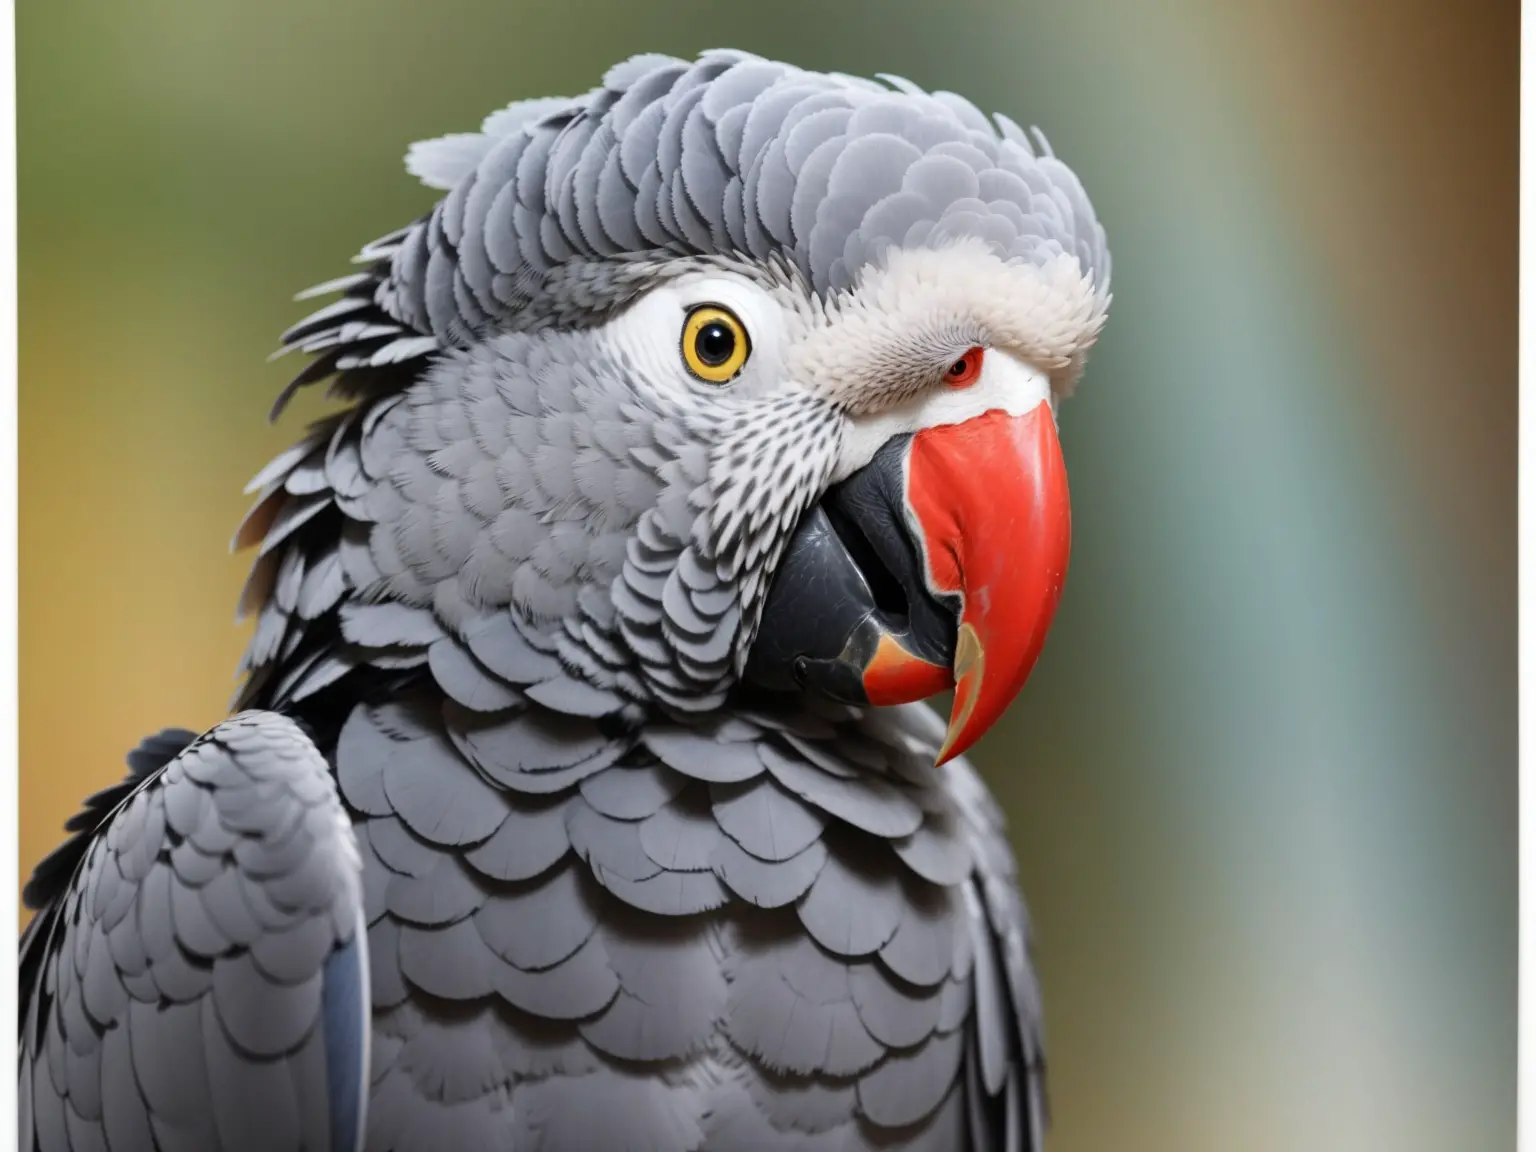 Pistachios: Safe for African Greys?